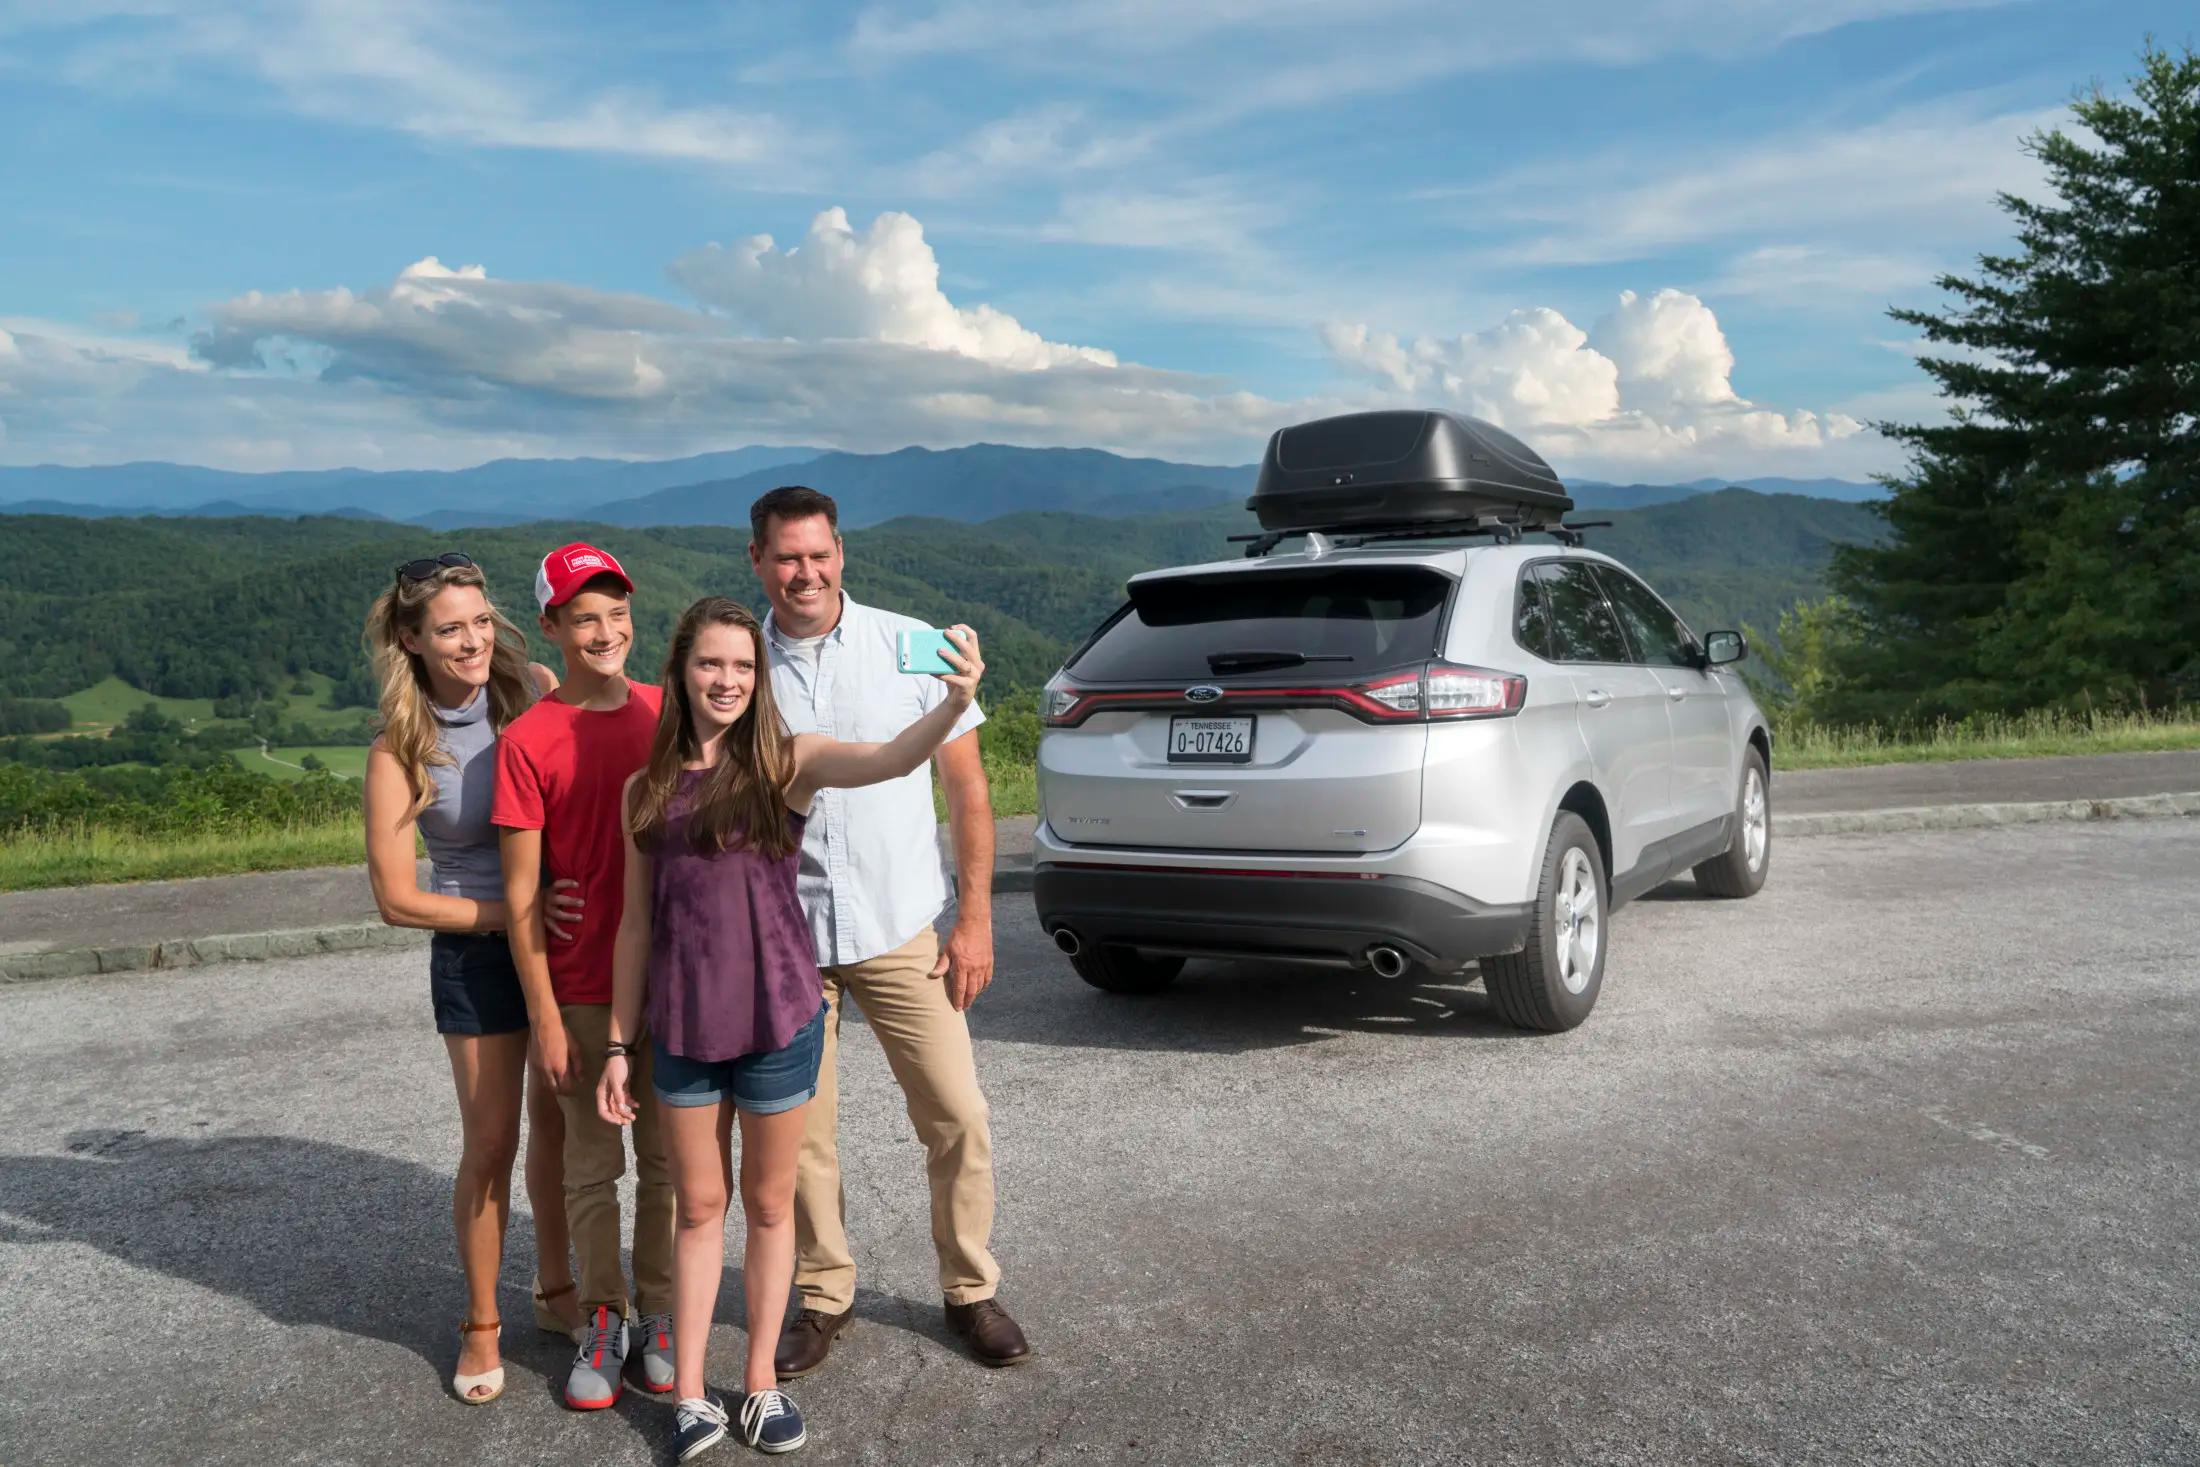 Tennessee family taking selfie next to car while traveling in mountains